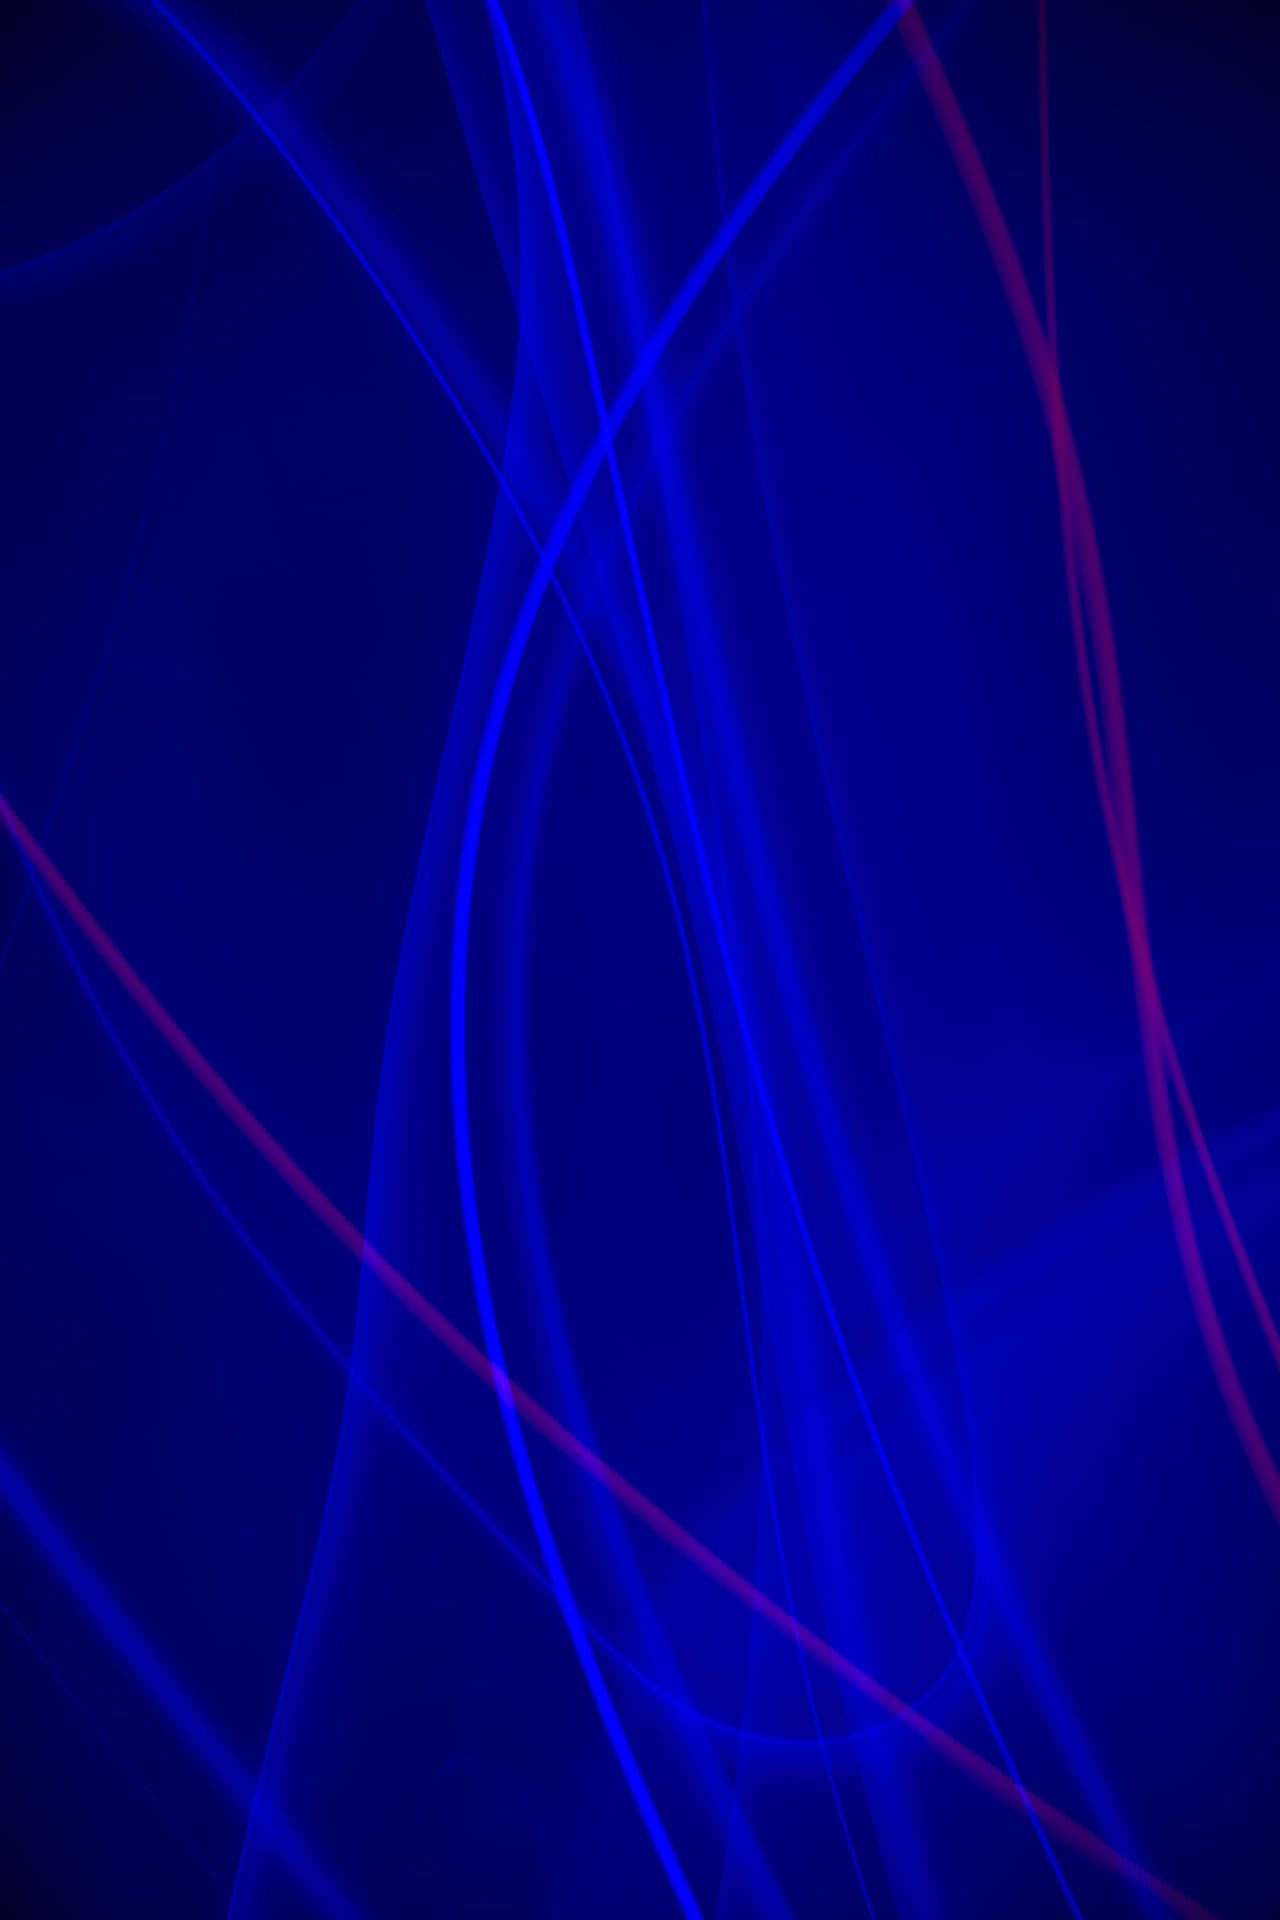 A Vibrant Abstract Blue Background